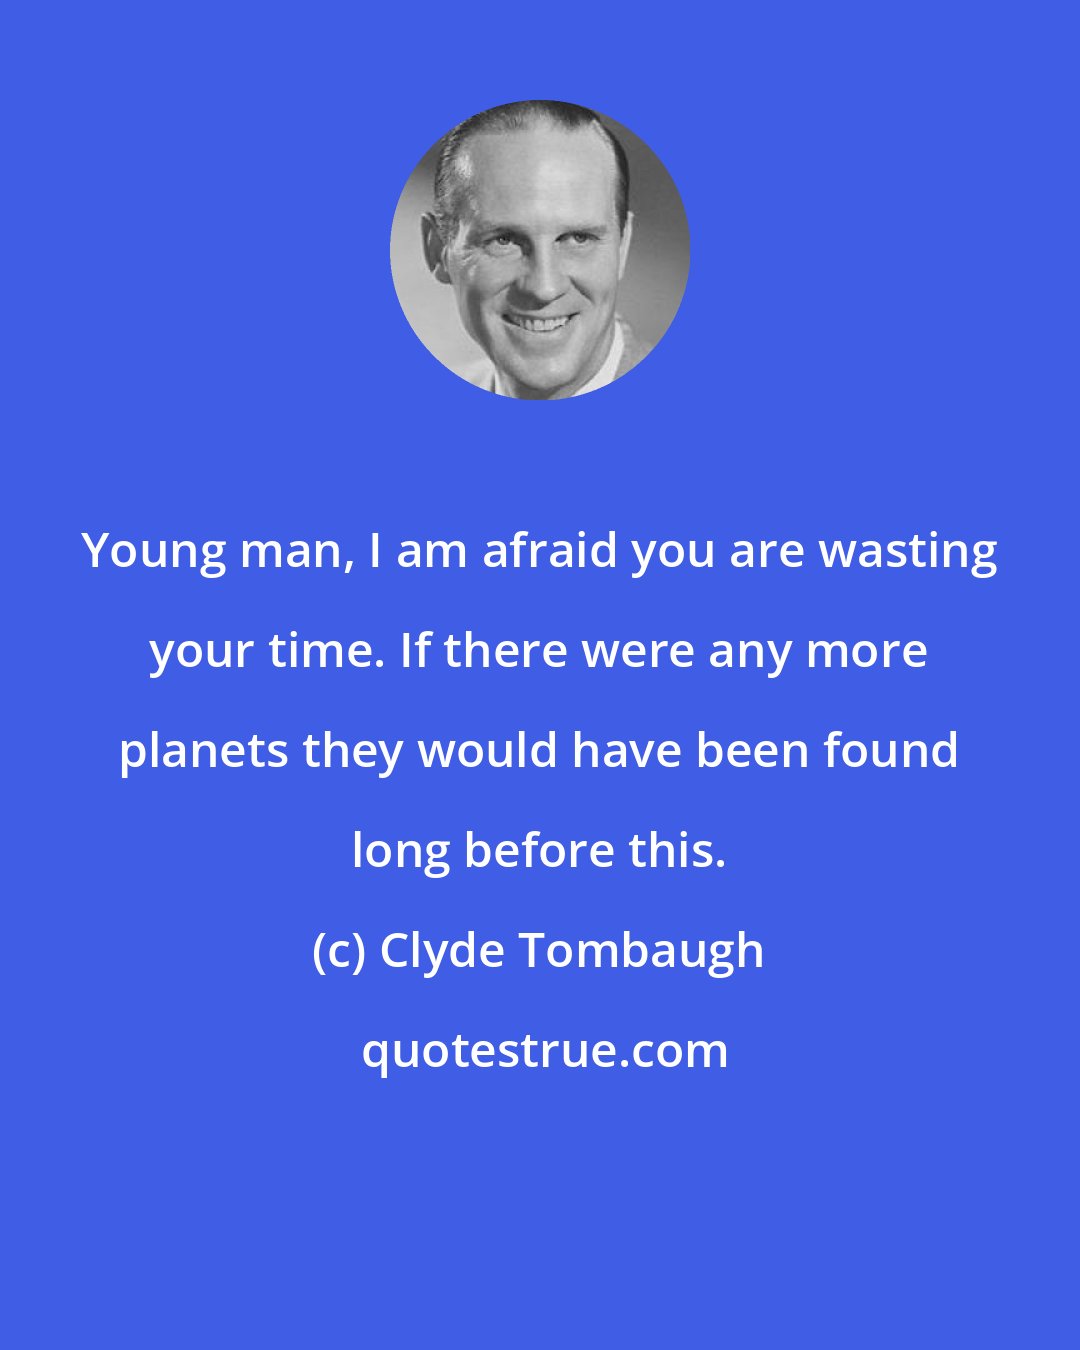 Clyde Tombaugh: Young man, I am afraid you are wasting your time. If there were any more planets they would have been found long before this.